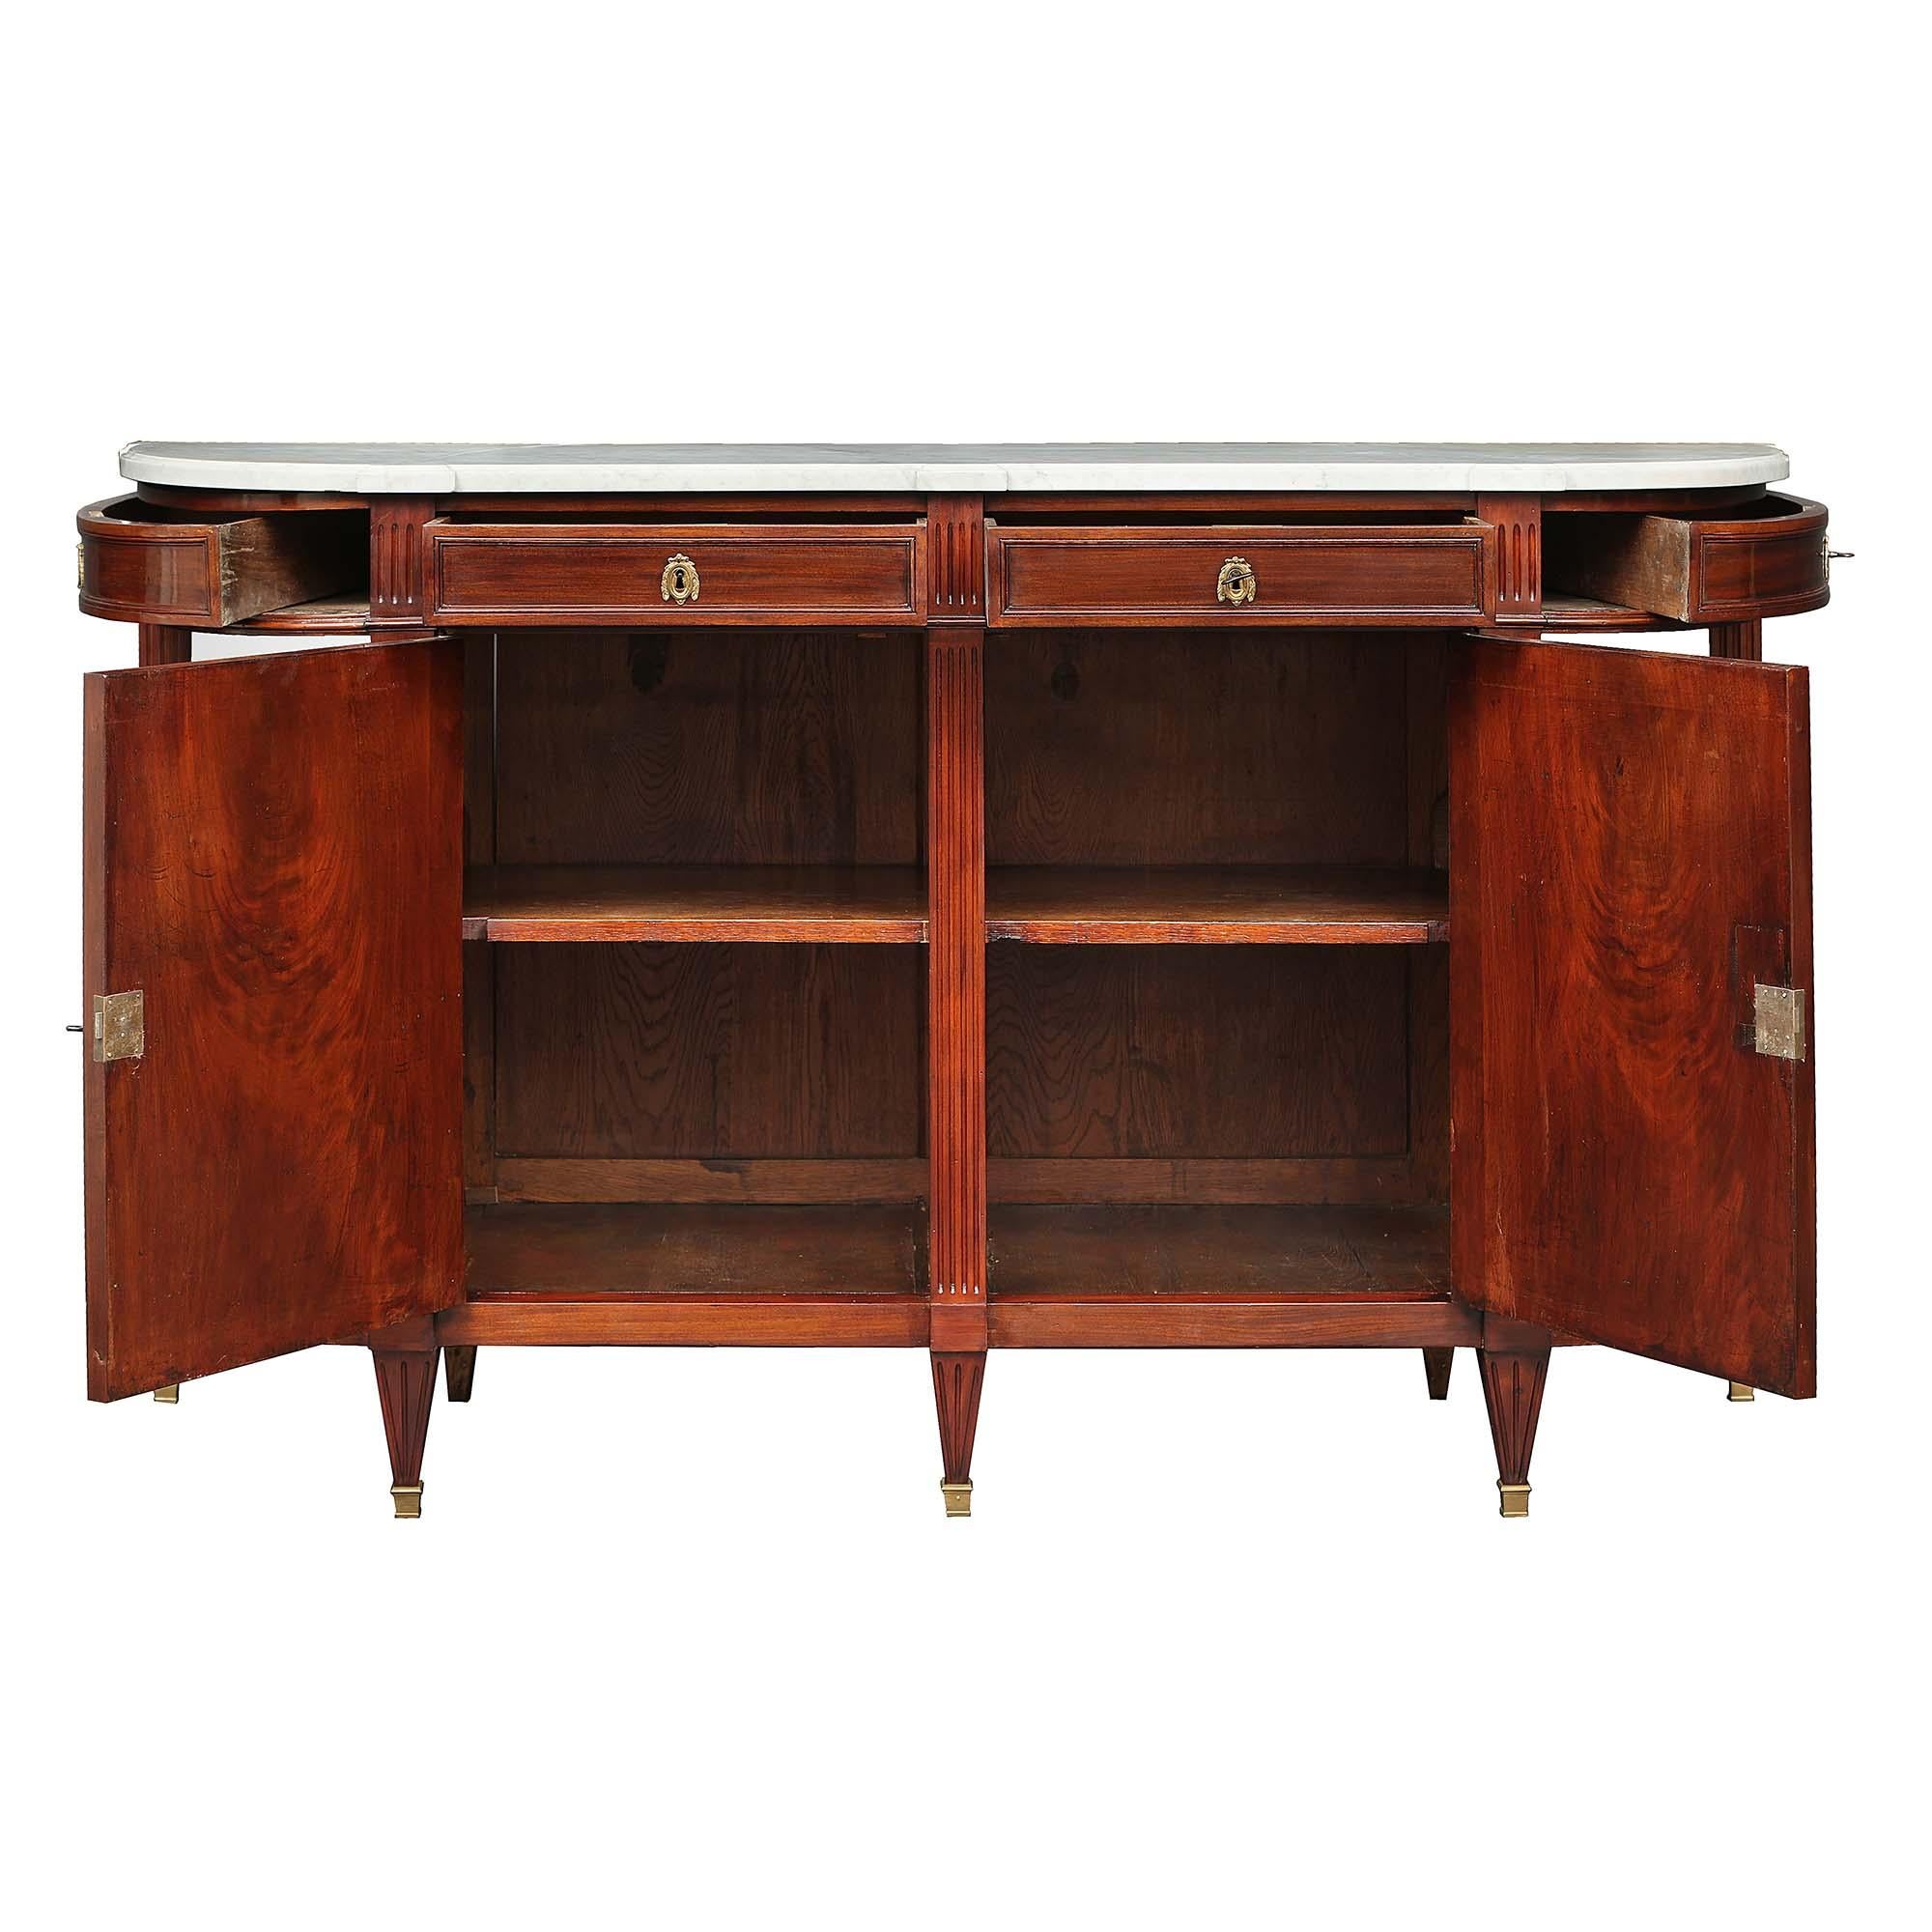 French 19th Century Louis XVI Style Mahogany Buffet with Marble Top In Good Condition For Sale In West Palm Beach, FL